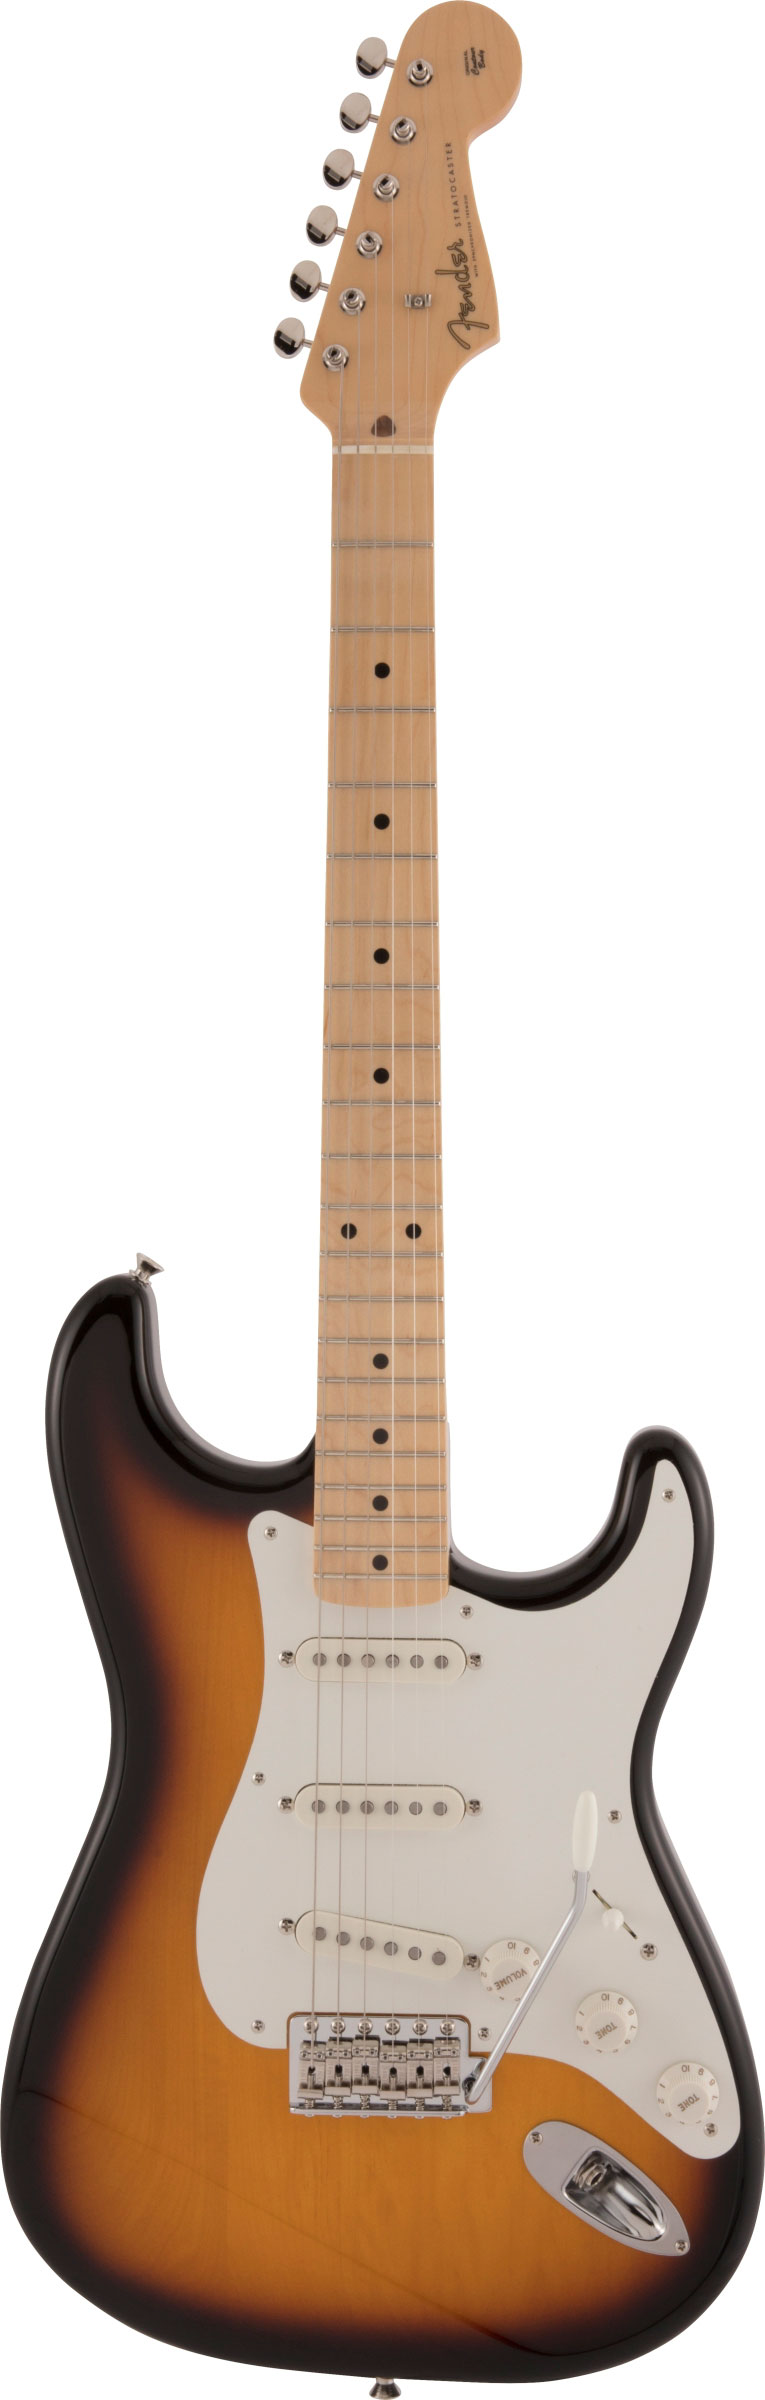 Buy the Fender guitarguitar UK Exclusive Made in Japan Traditional II 50s  Stratocaster 2 Tone Sunburst Maple Fingerboard